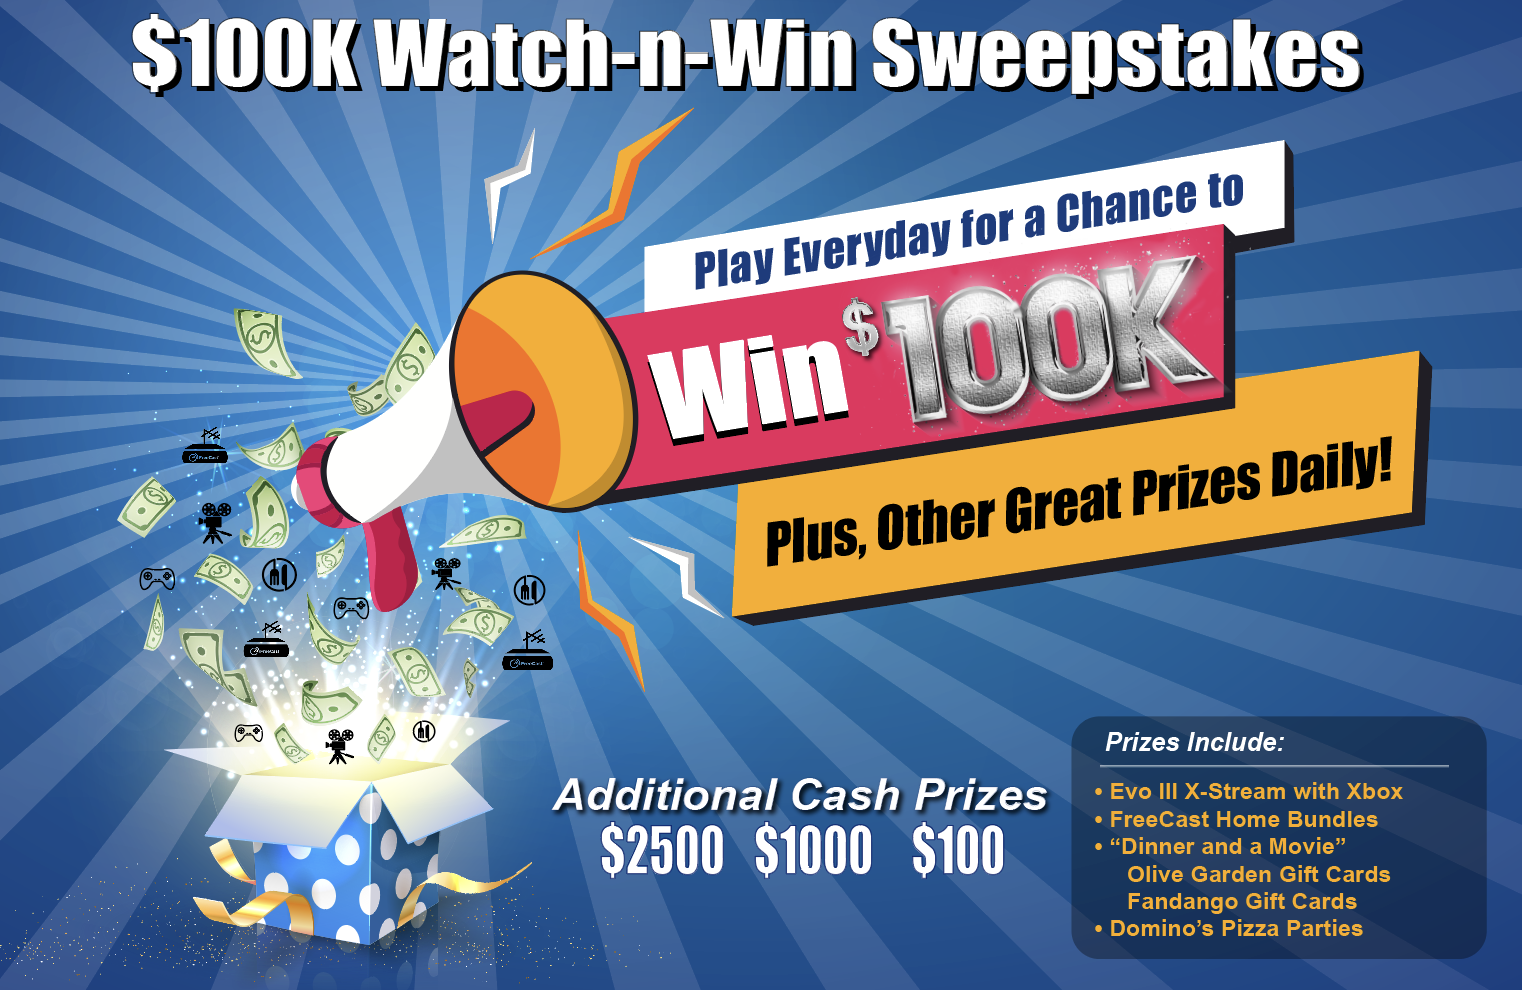 FreeCast to Launch a Watch-n-Win Play Every Day $100K Sweepstakes 